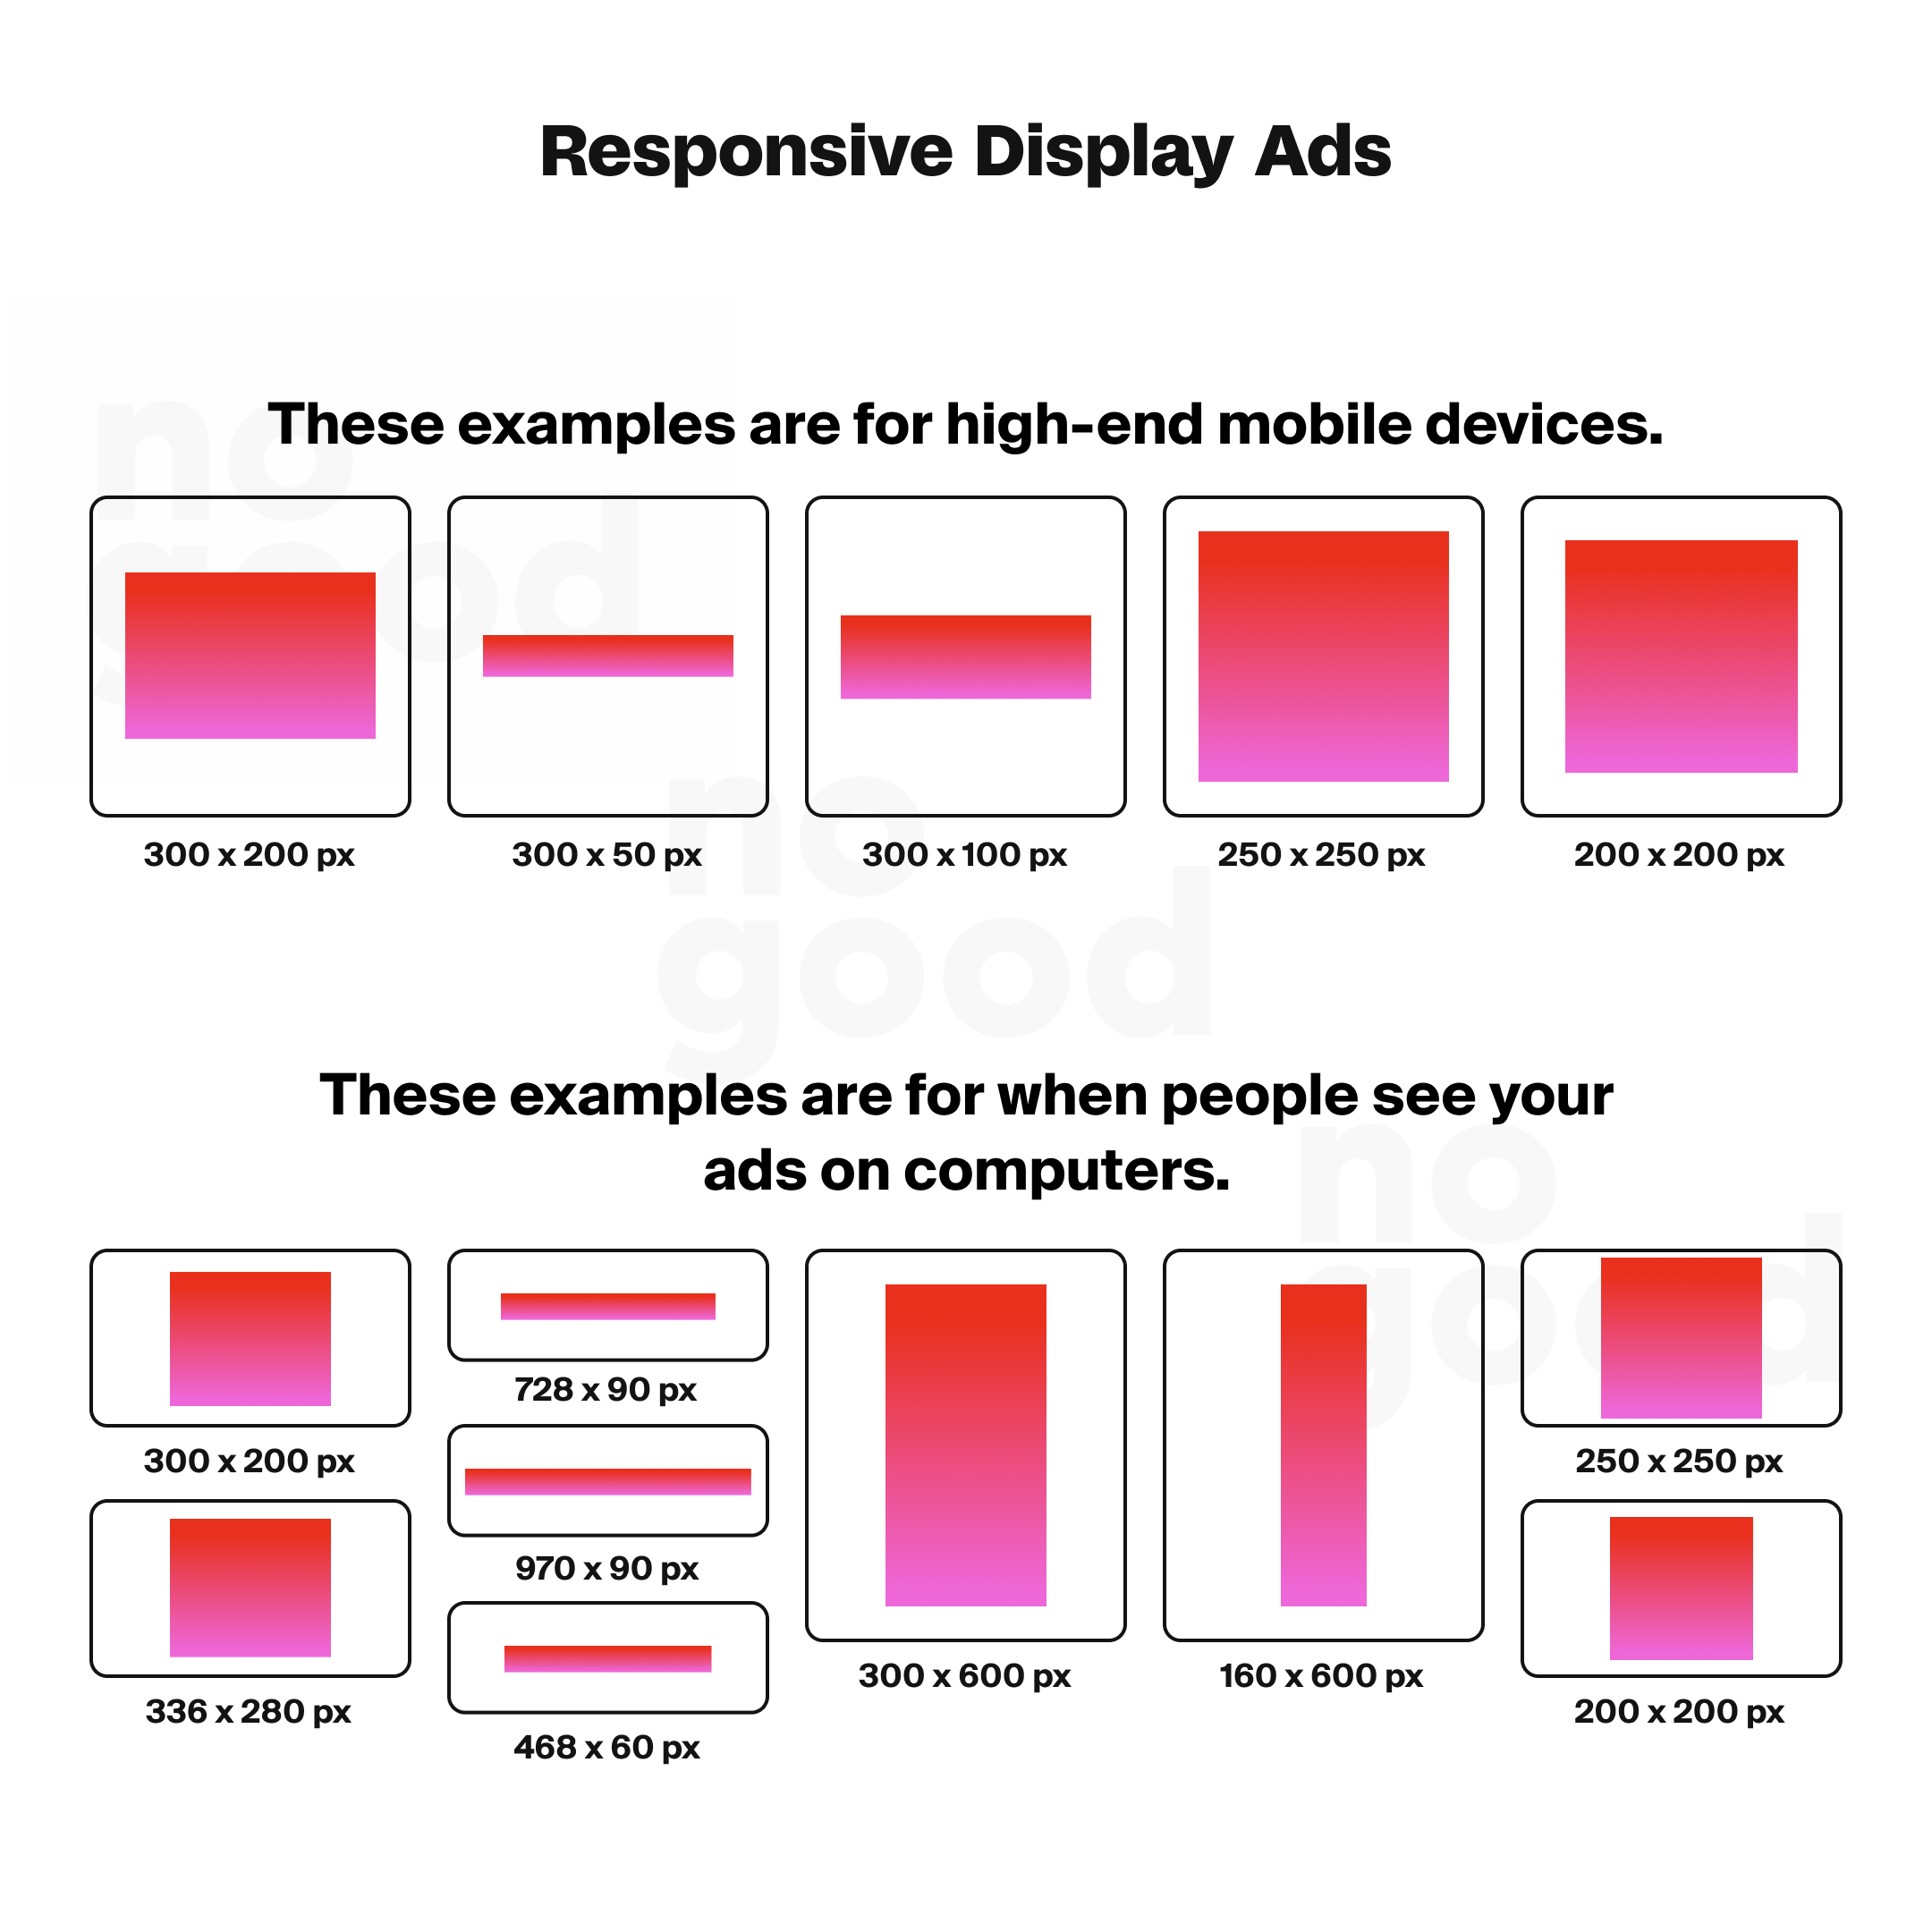 Pixels for responsive display ads on different types of devices.